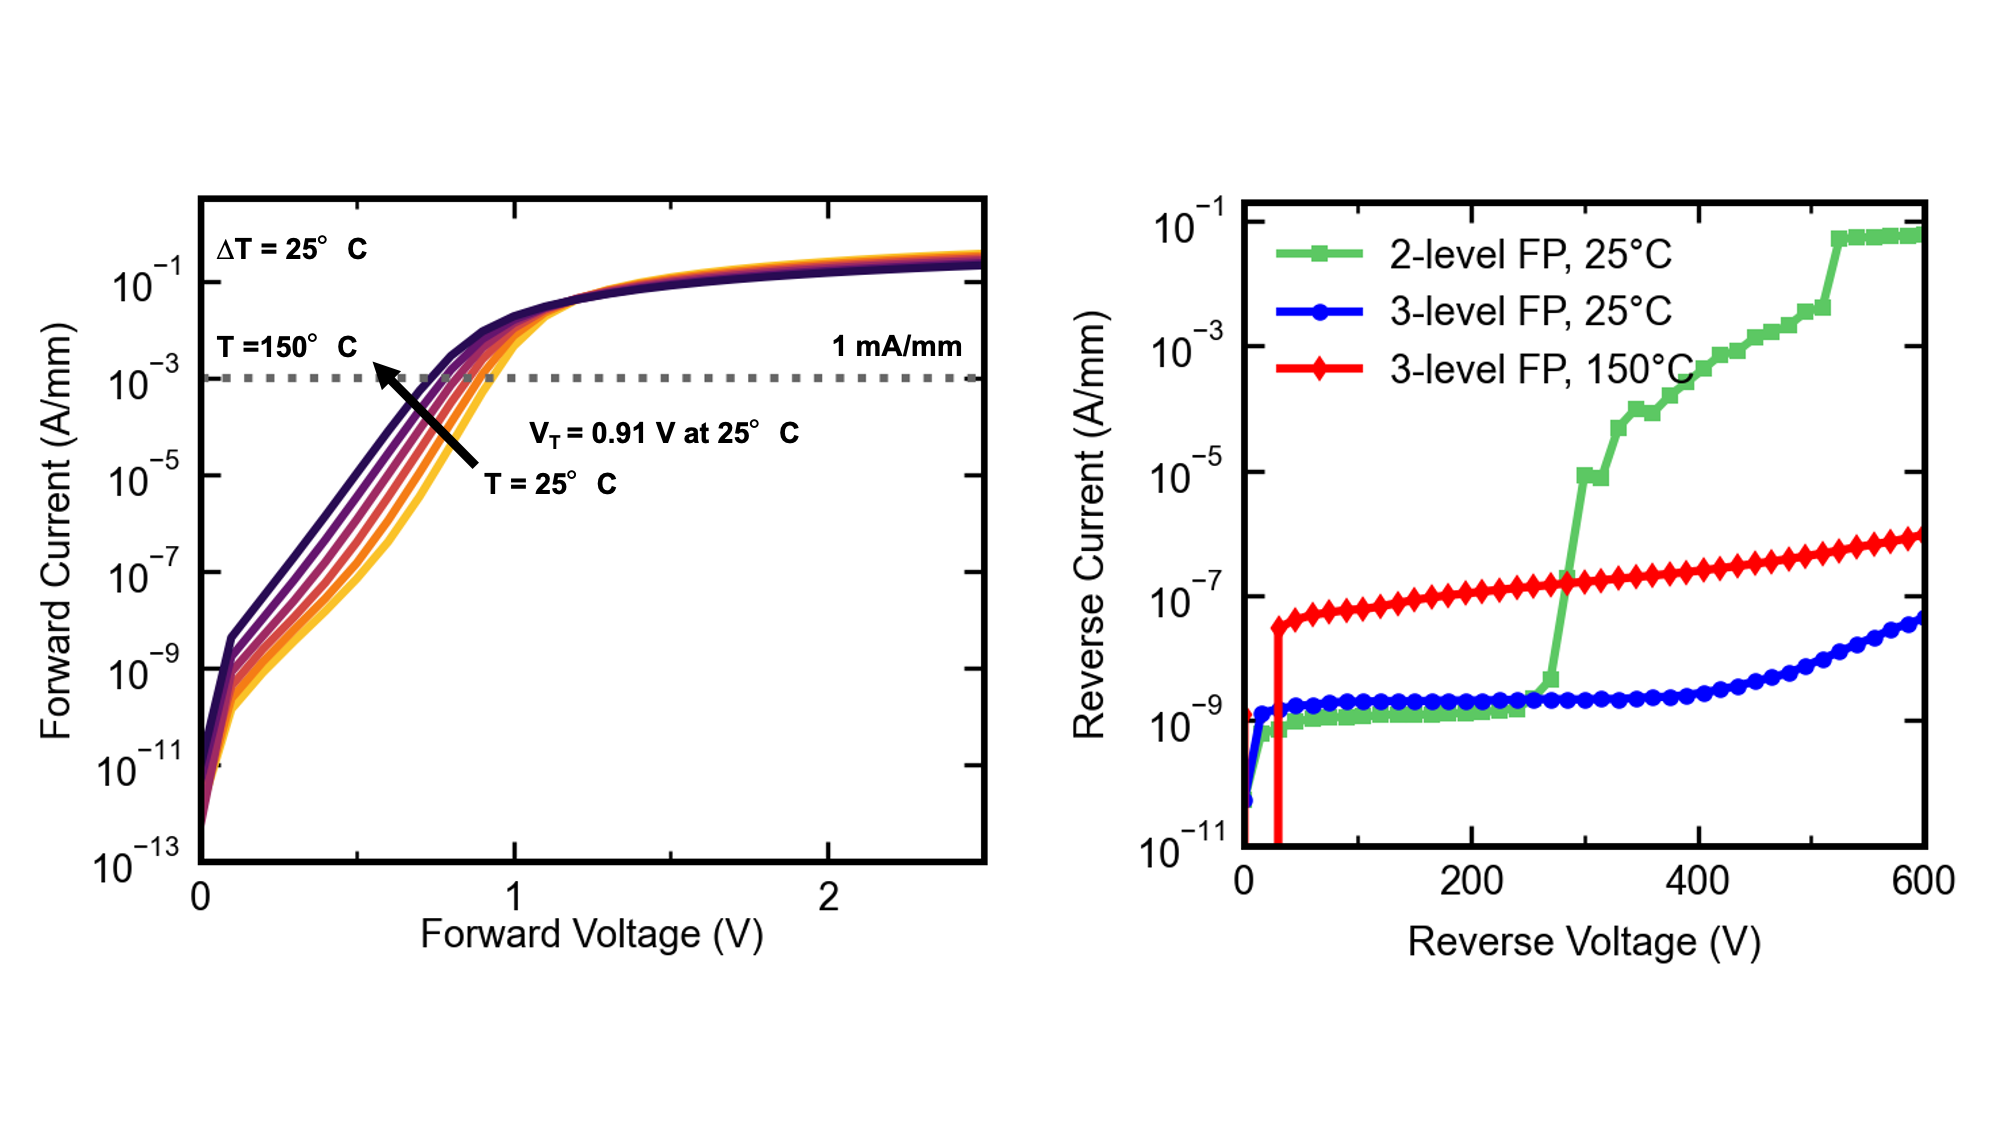 Characteristics of manufactured GET-SBDs showing (left) low turn-on voltage of 0.91V at 25°C in semi-log scale, and (right) low reverse leak currents (2 nA/mm for 25°C) for two different anode field plates configurations evaluated at 25 and 150°C.